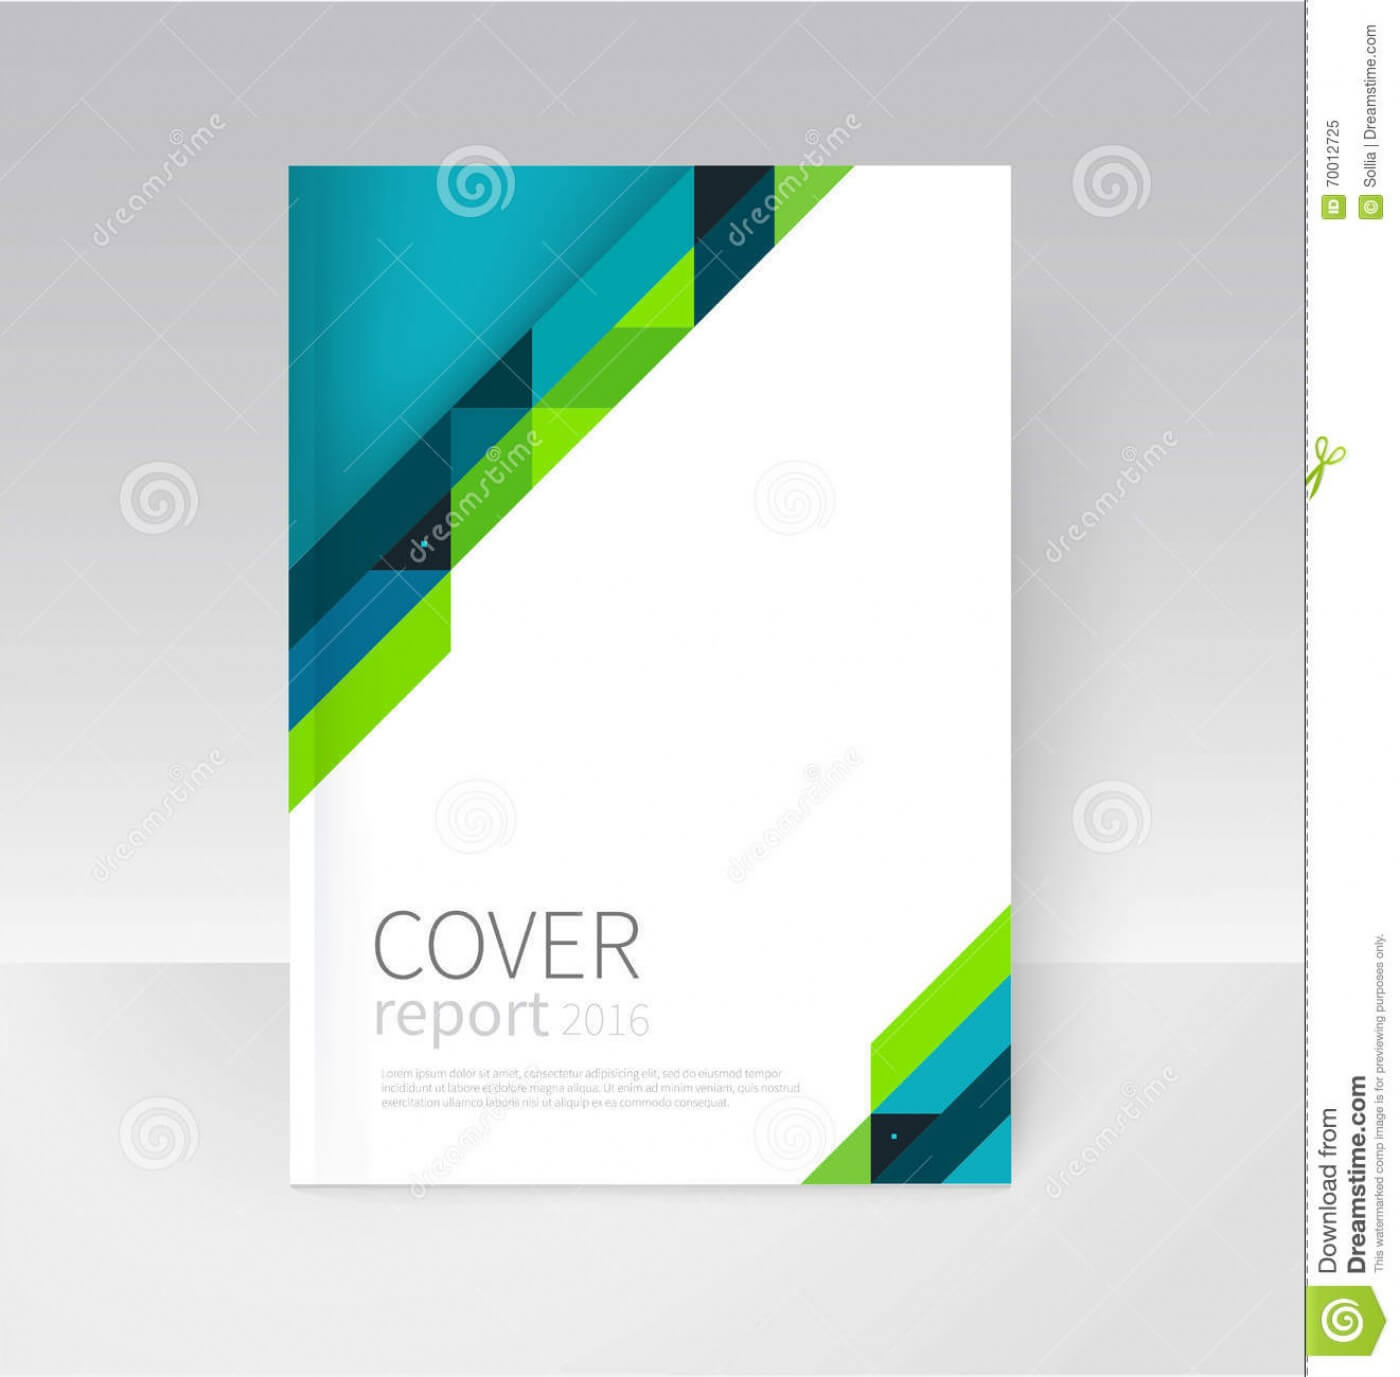 022 Word Cover Pages Template Ideas Page Free Report For Report Cover Page Template Word